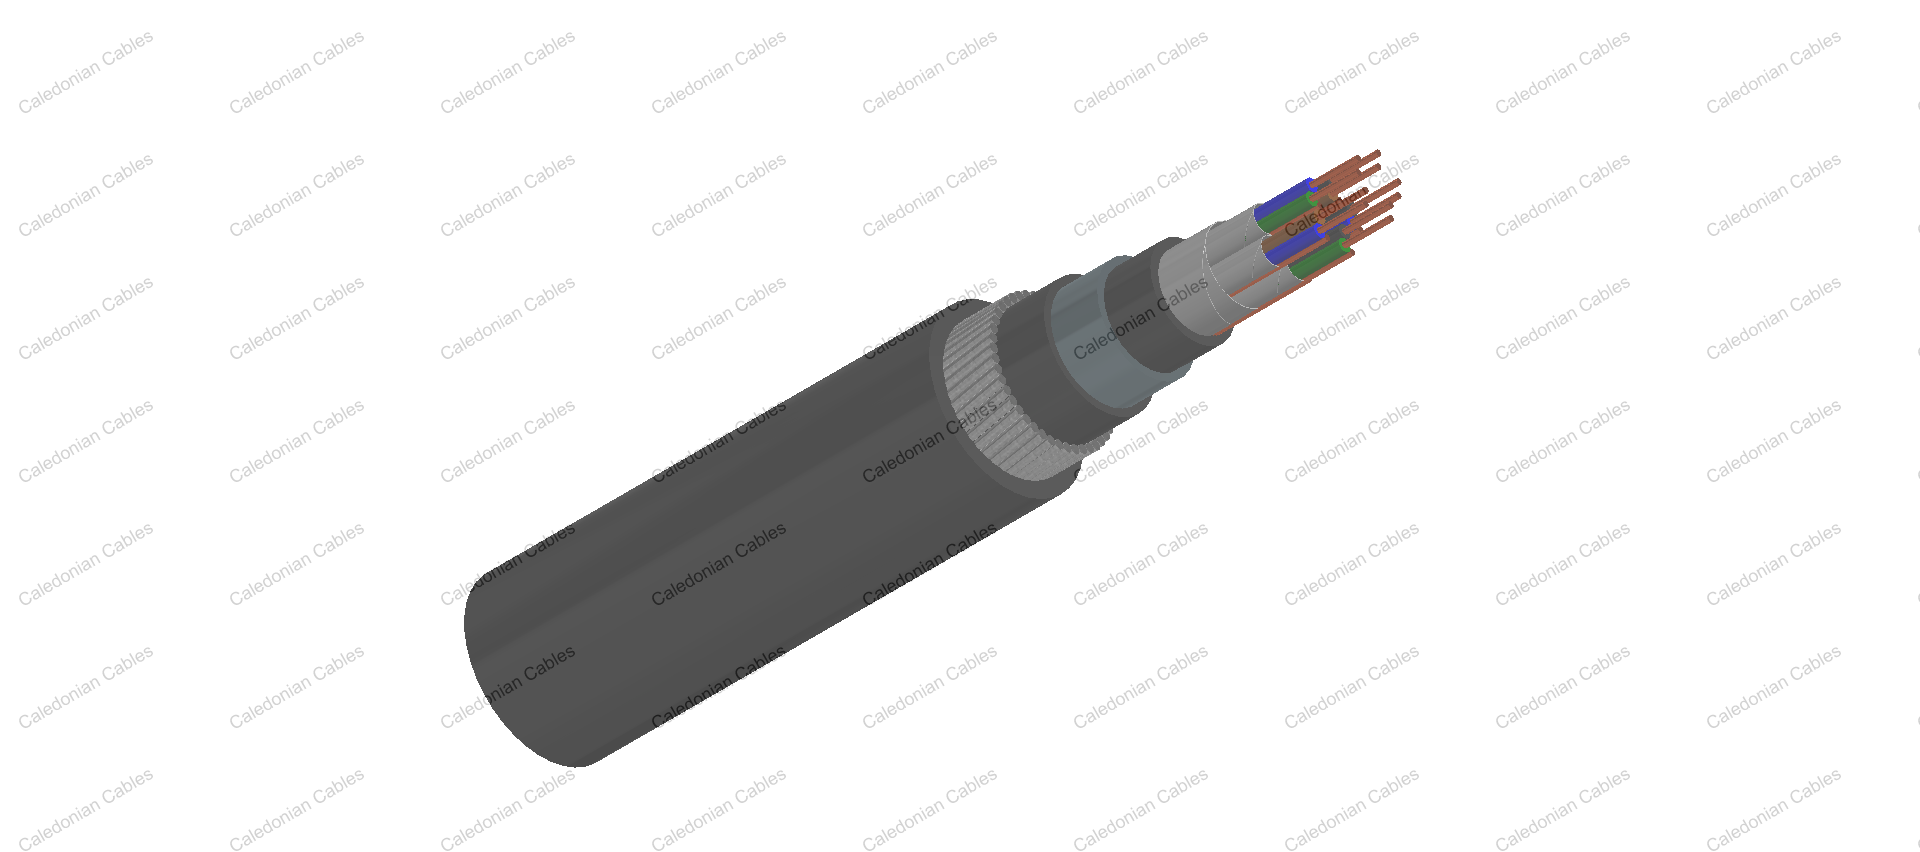 PAS 5308 Cable Part 1 Type 3 PE-IS-OS-Lead-SWA-PVC